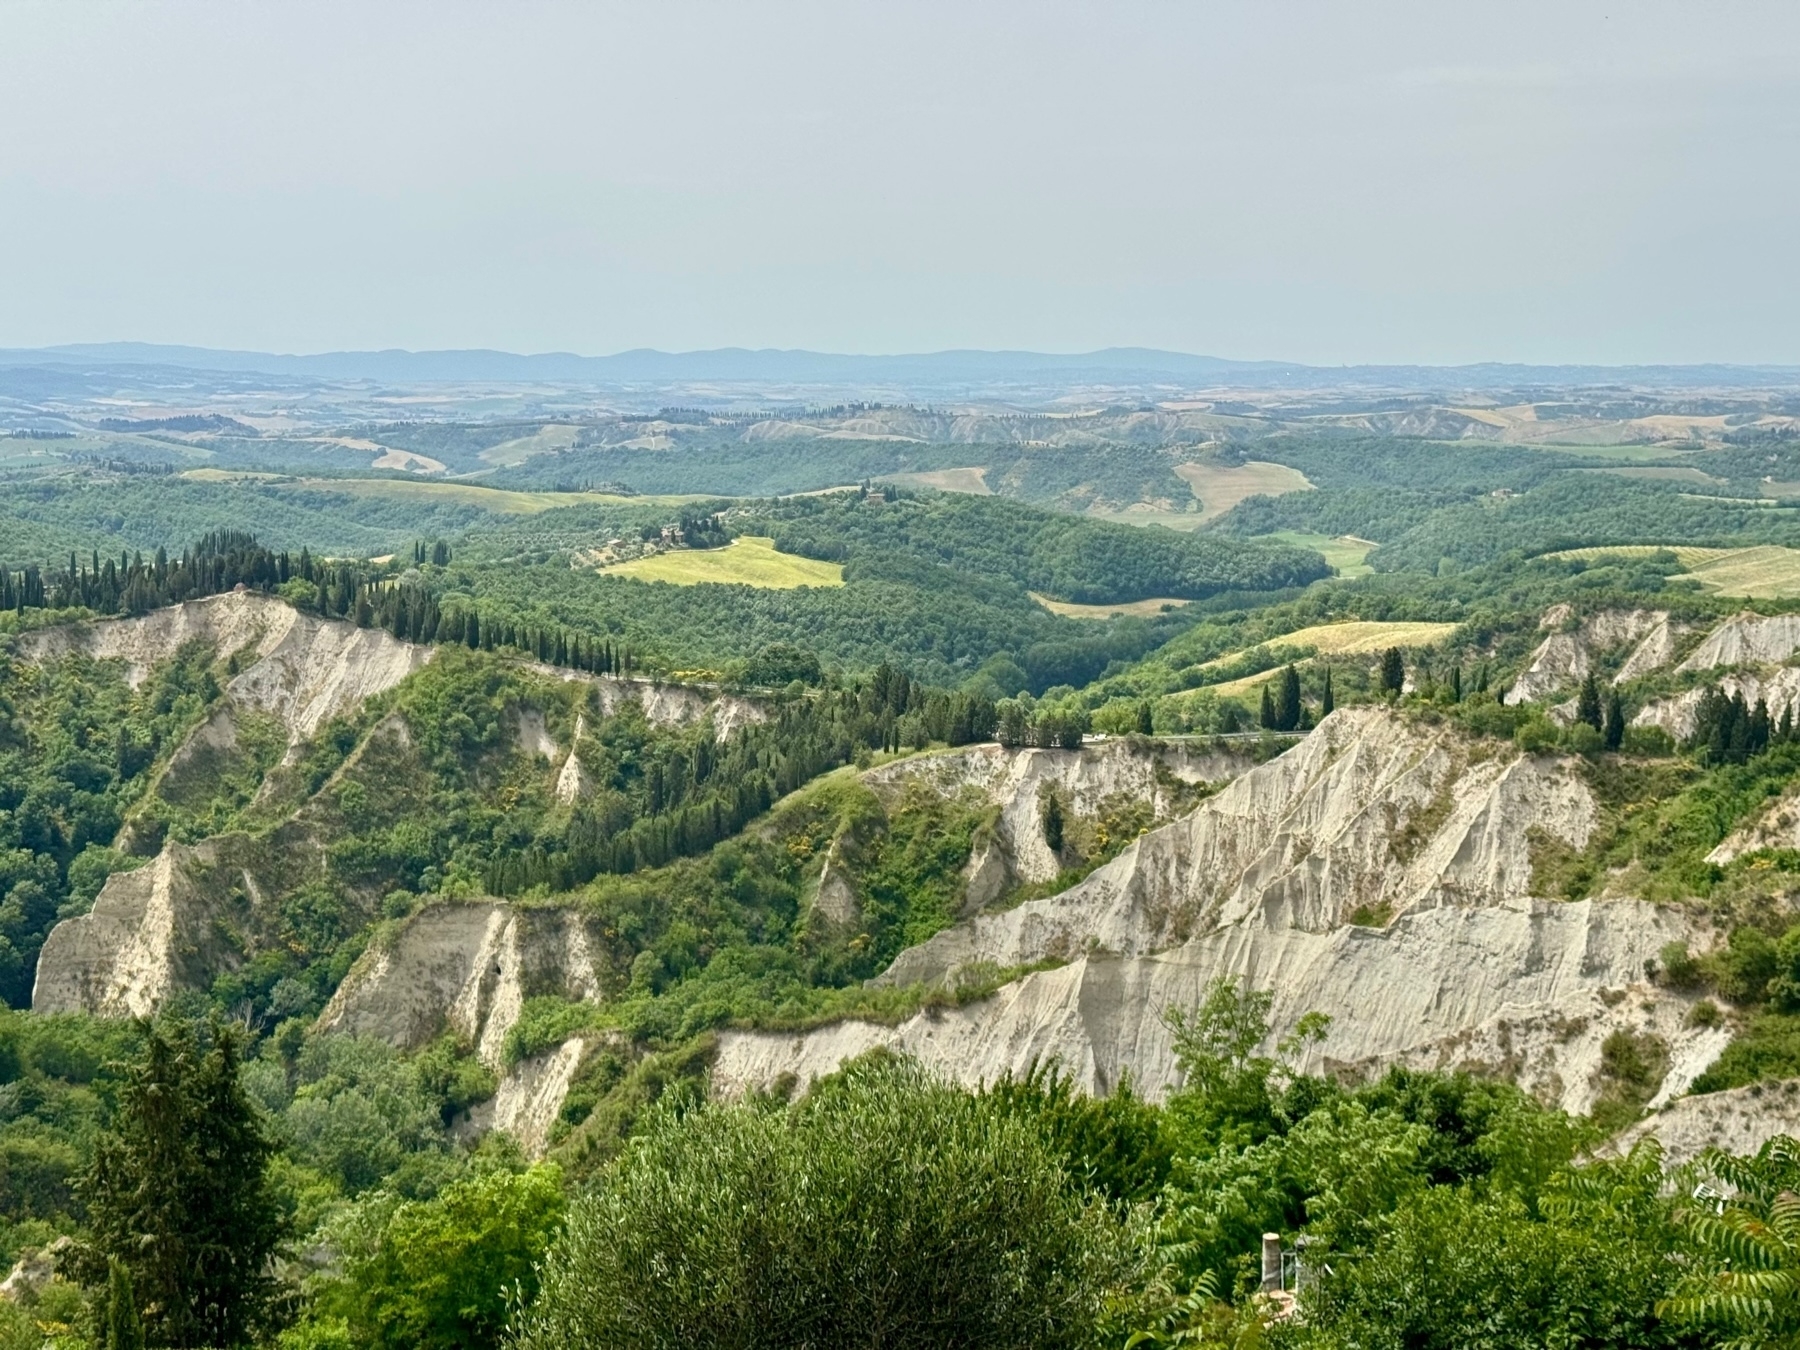 A panoramic view of a hilly landscape featuring rugged, white chalk formations and lush green vegetation. Rolling hills and dense forests stretch into the distance, with patches of farmland visible under a clear, light blue sky.